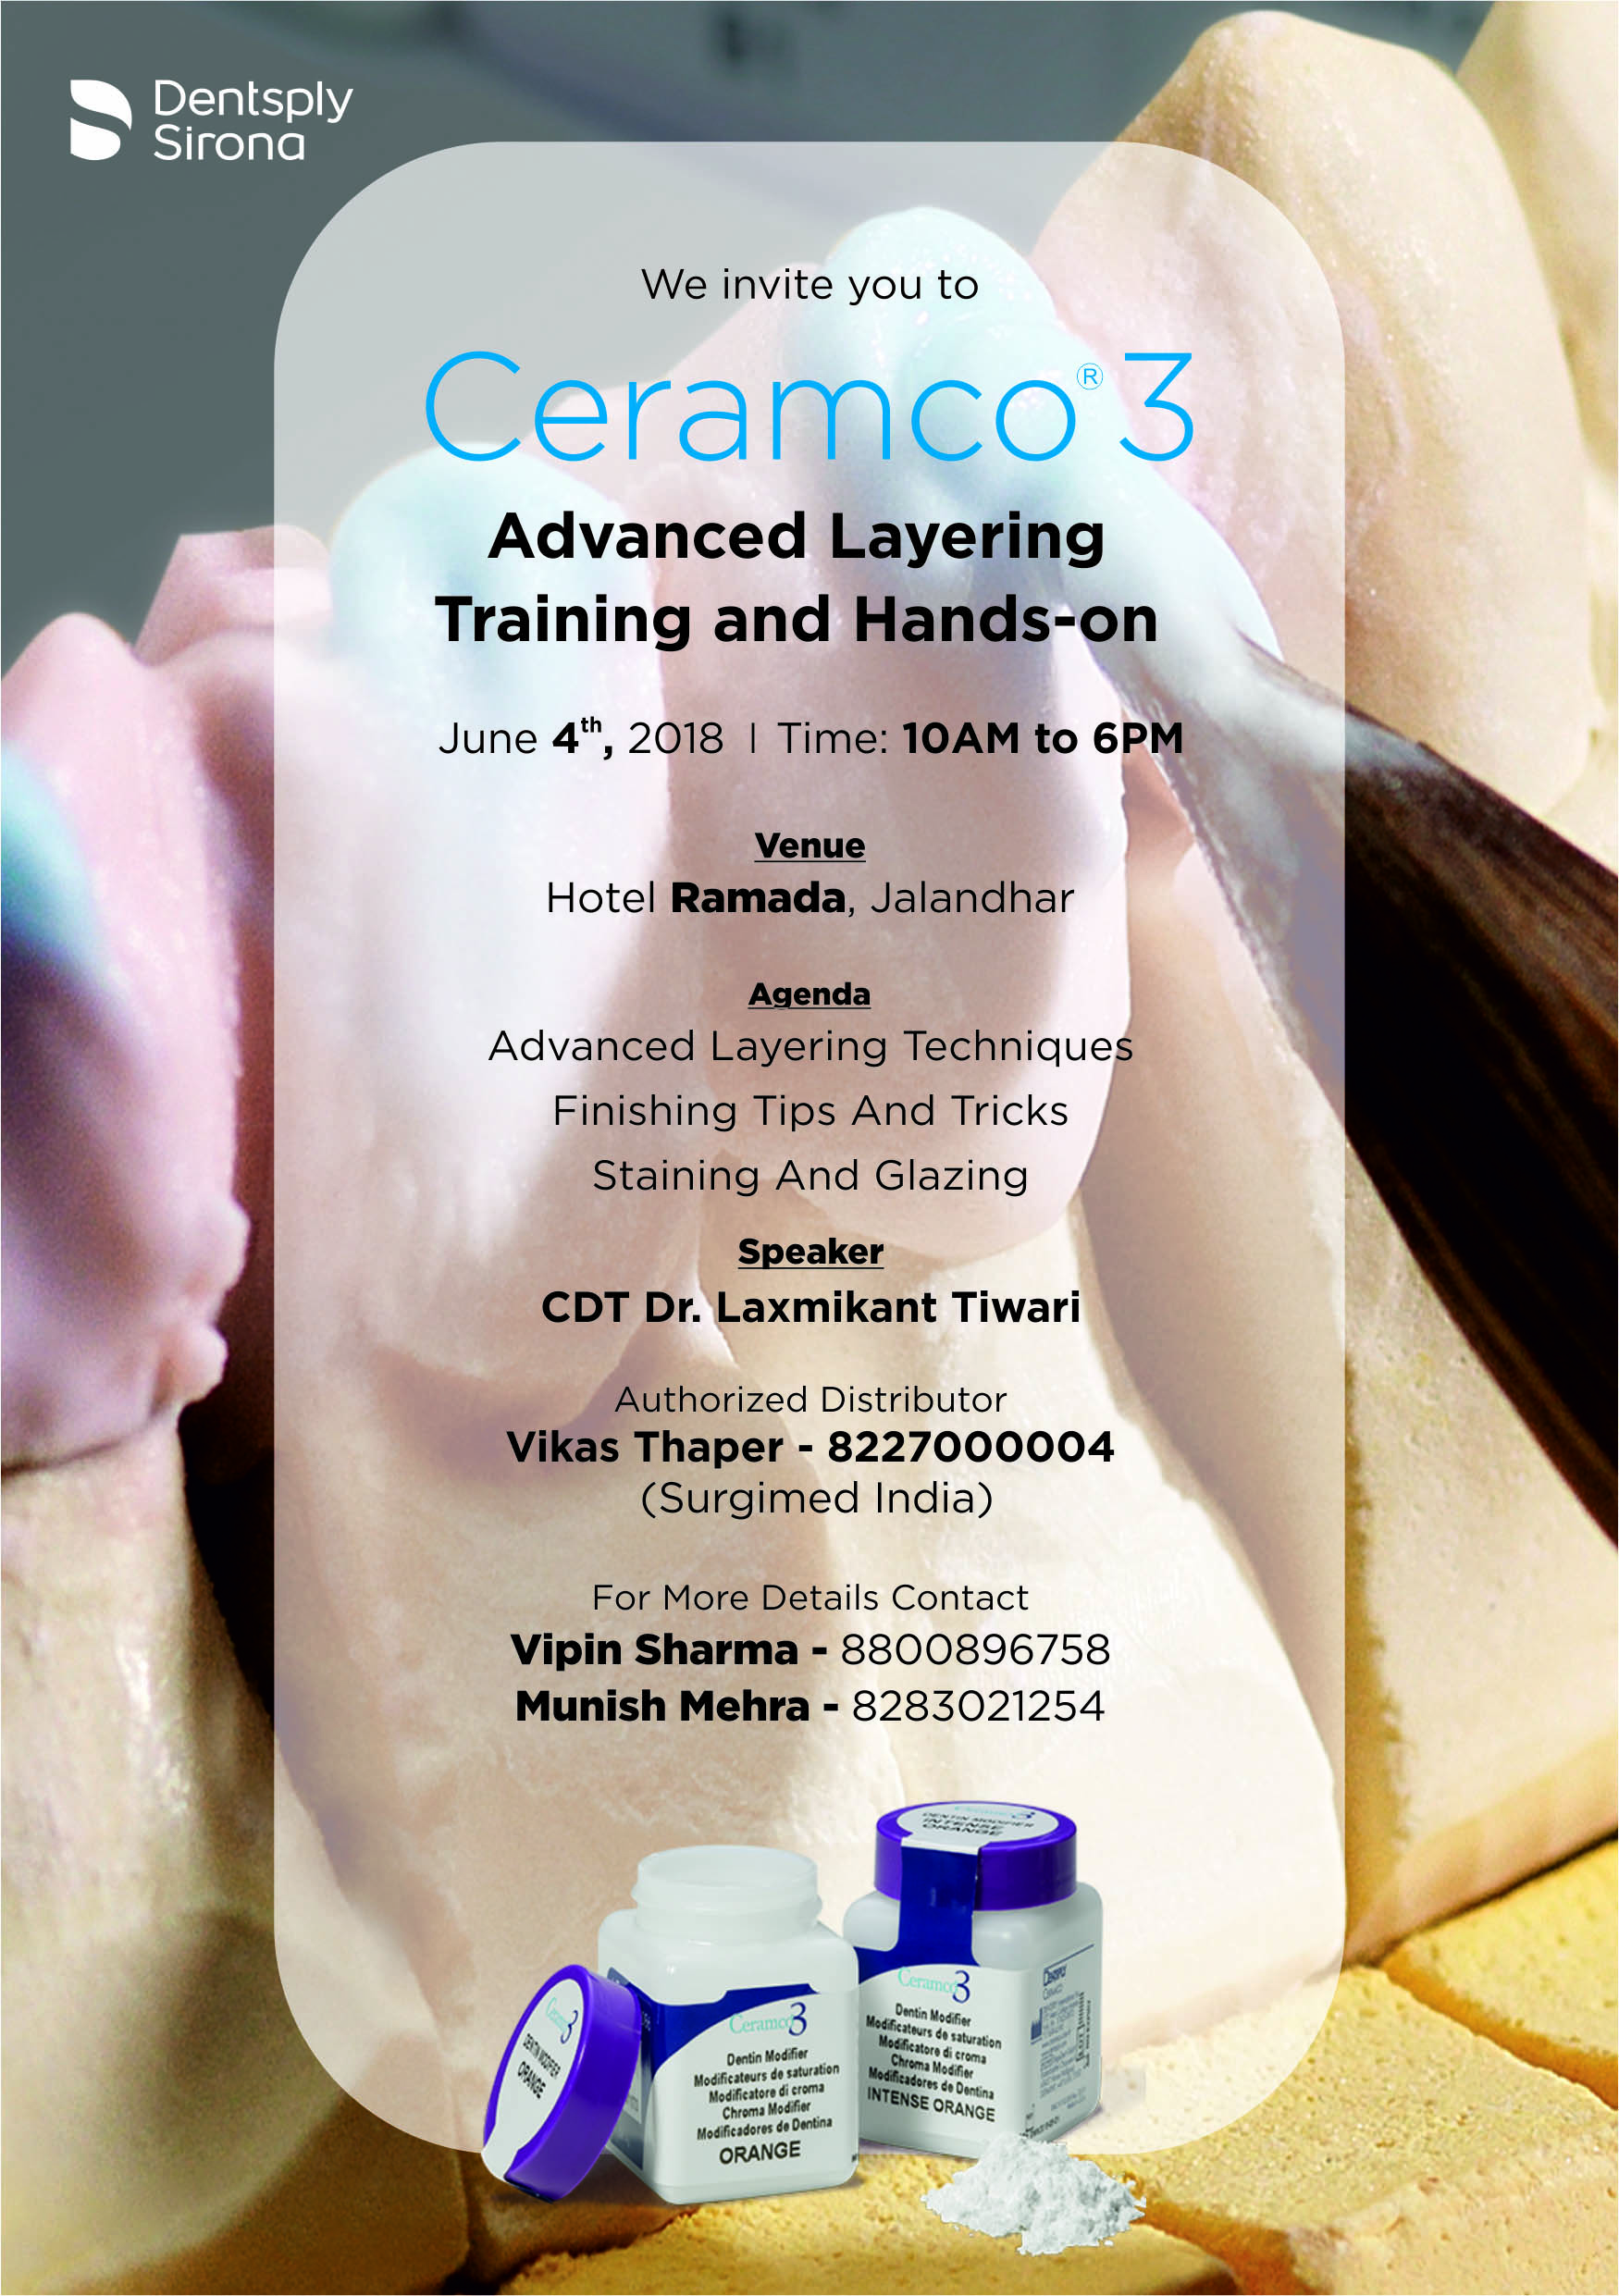 Ceramco 3 Advanced Layering Training and Hands-on